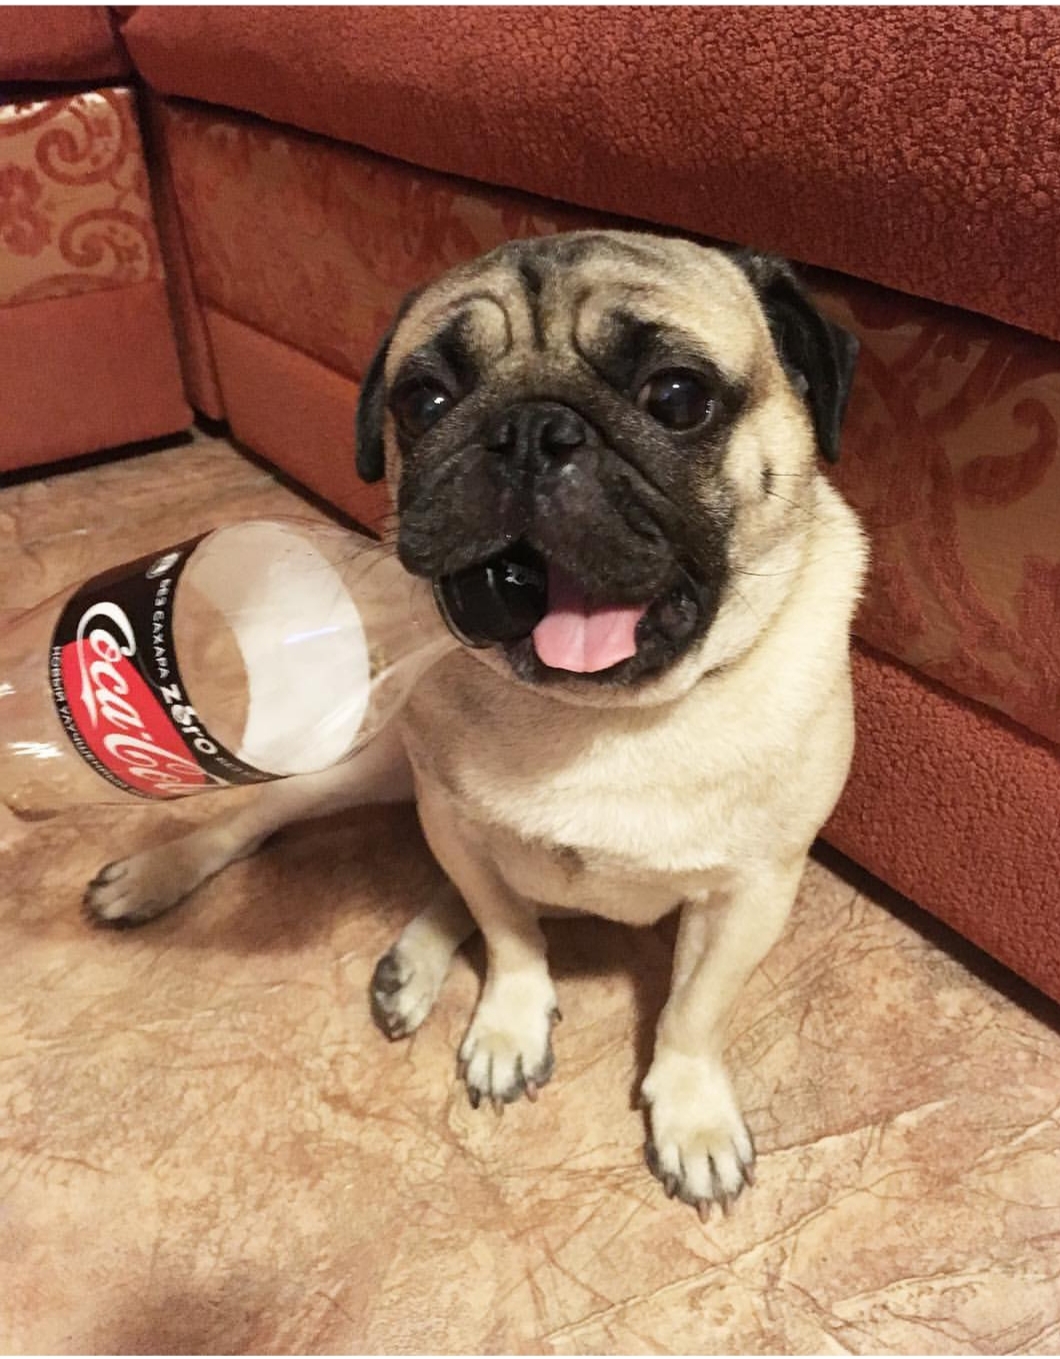 A Pug sitting on the floor while biting a coca cola bottle